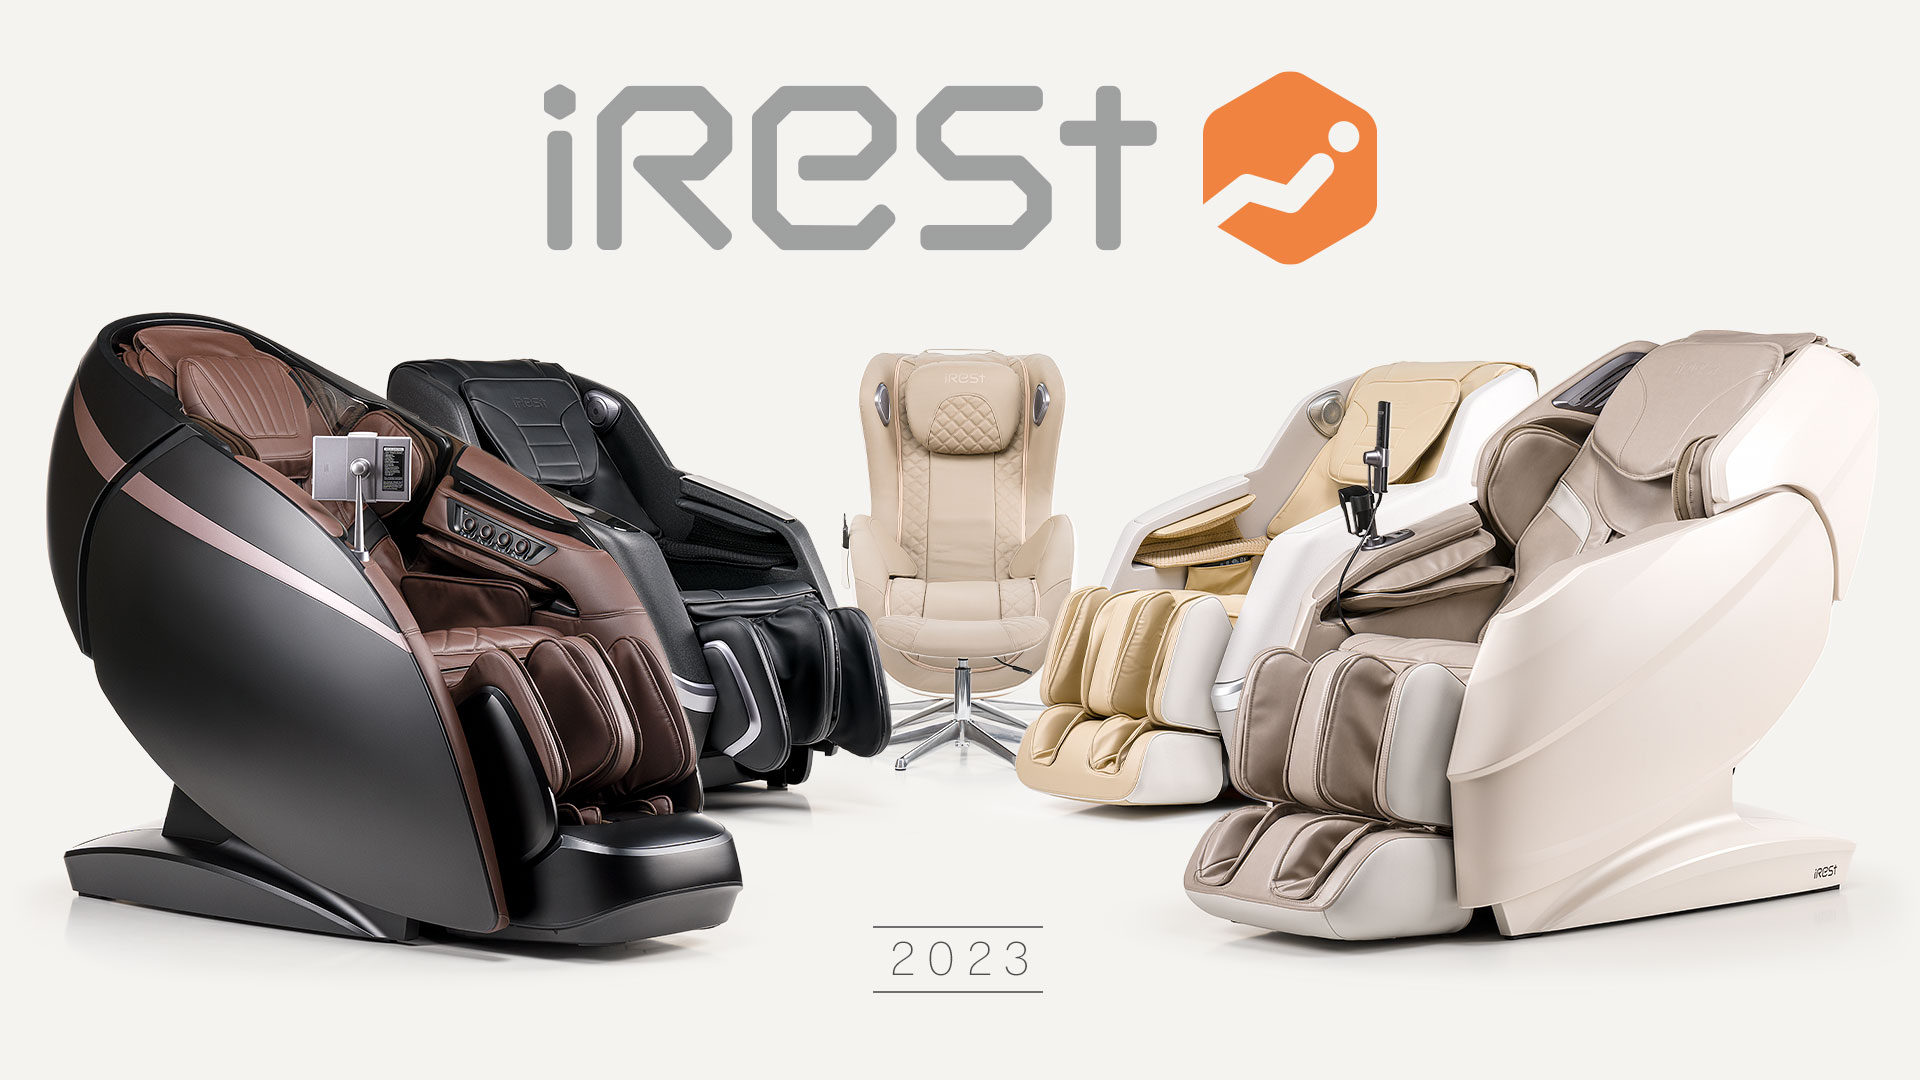 New models of the iRest brand will soon appear in our product range!